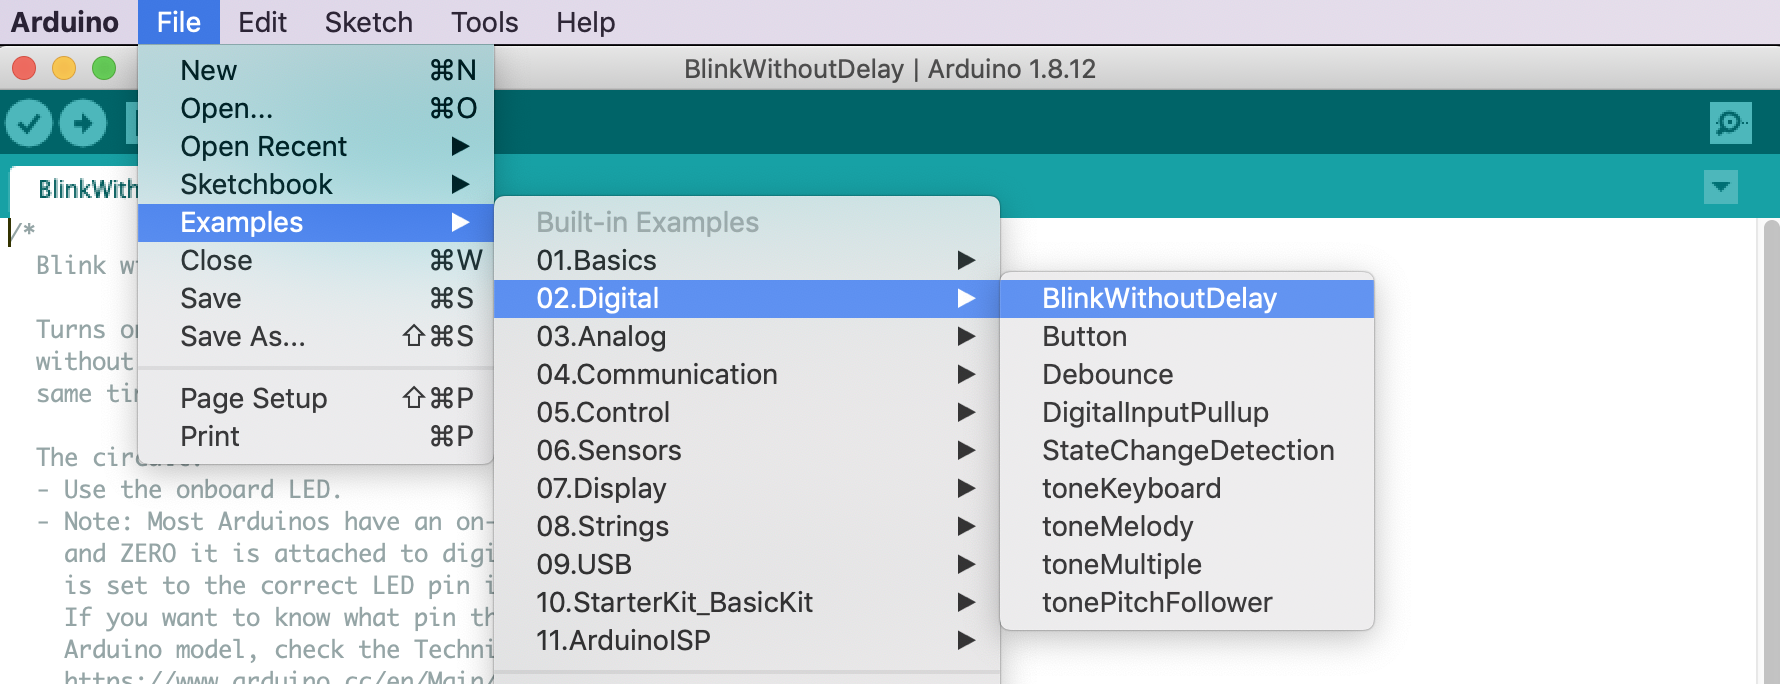 Screenshot of accessing the official BlinkWithoutDelay example directly from the Arduino IDE